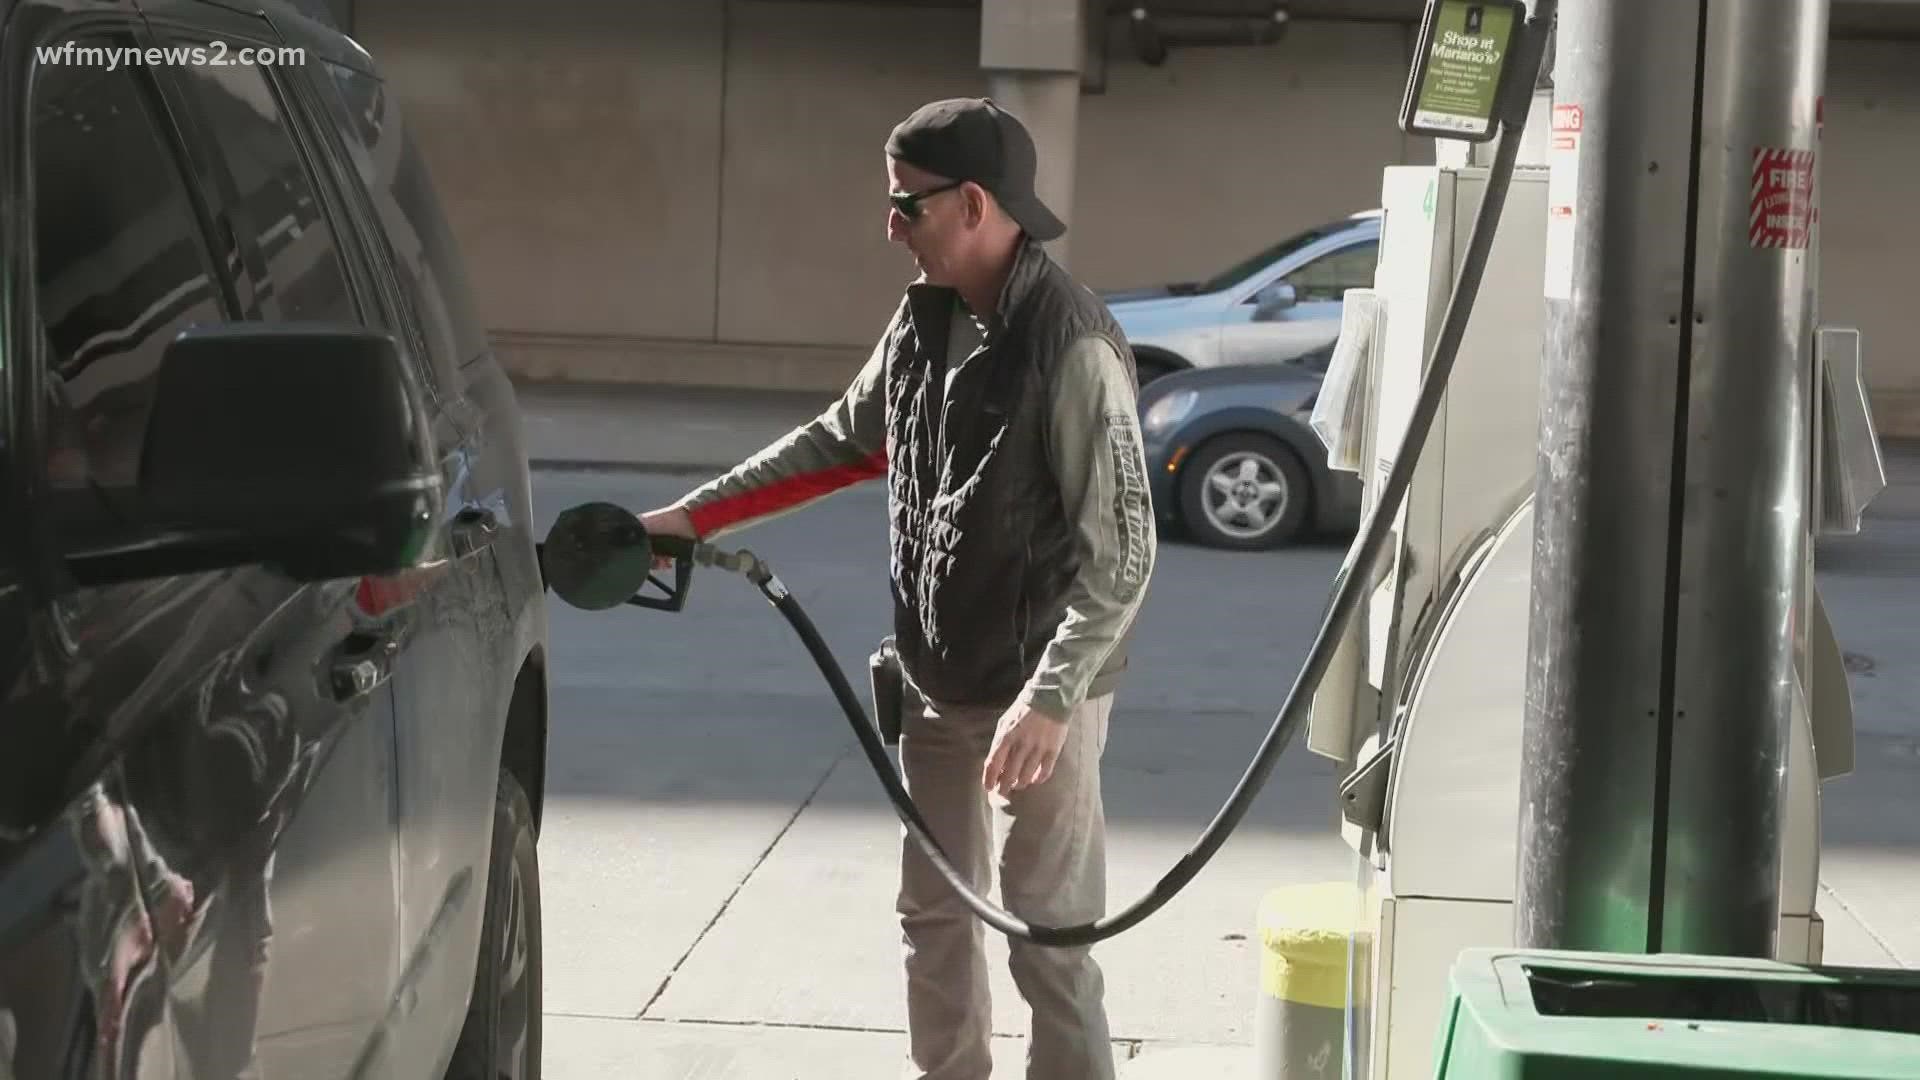 We've seen gas prices going up and back down the last few weeks, so what's driving this latest price hike?